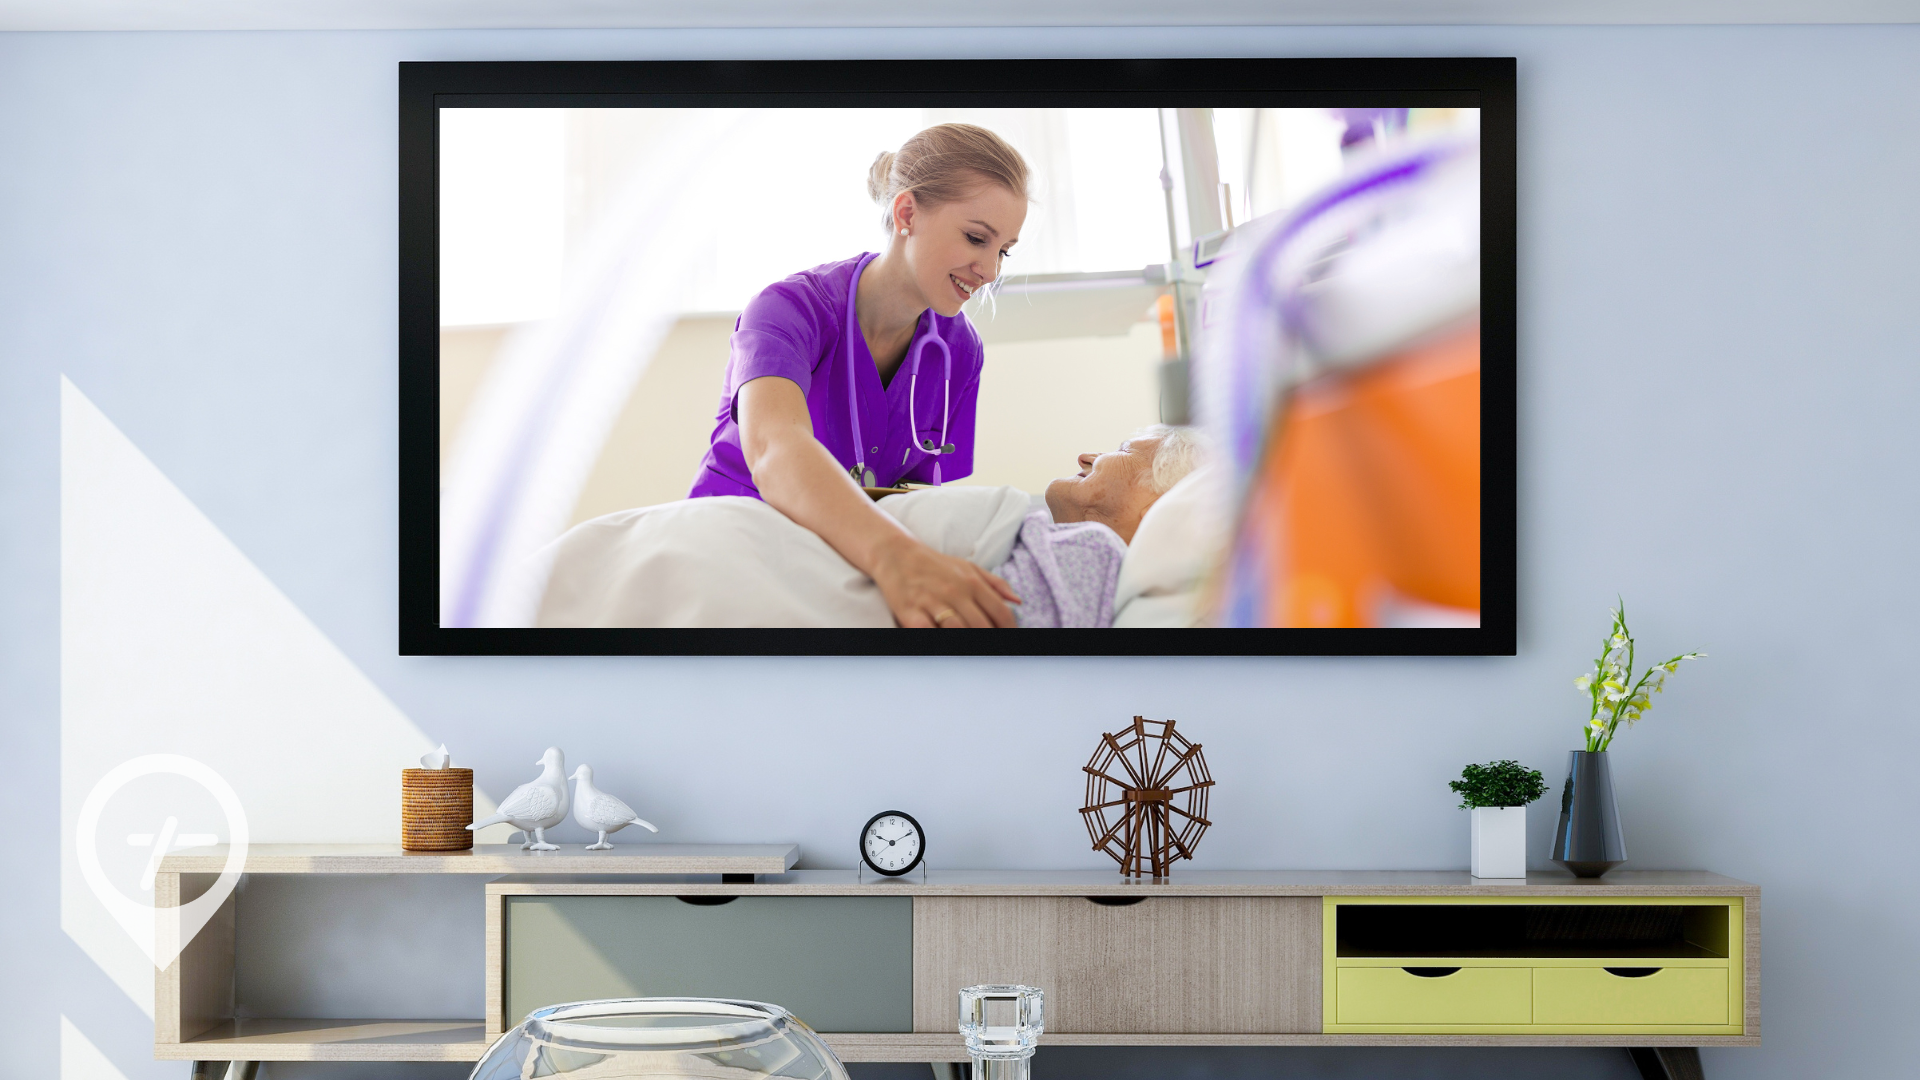 An entertainment center in a living room with a nurse tucking in a patient on the TV screen. 